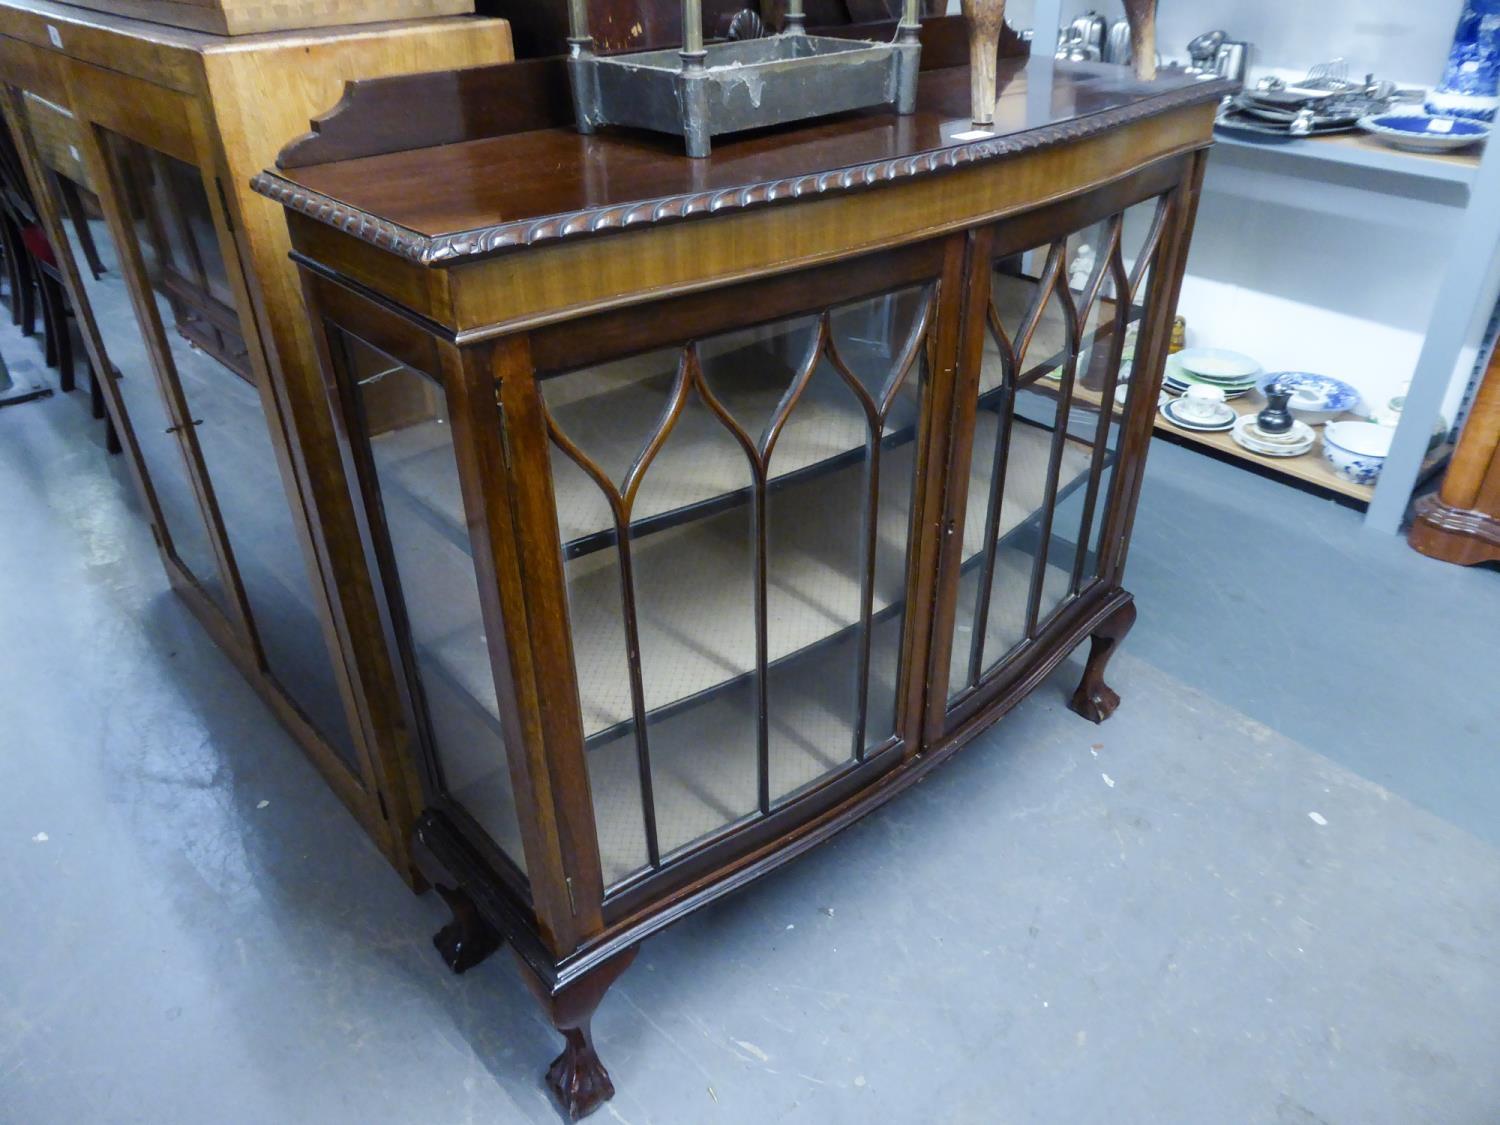 TWENTIETH CENTURY MAHOGANY DISPLAY CABINET, WITH ASTRAGAL GLAZED DOORS, ON CABRIOLE SUPPORTS, CLAW